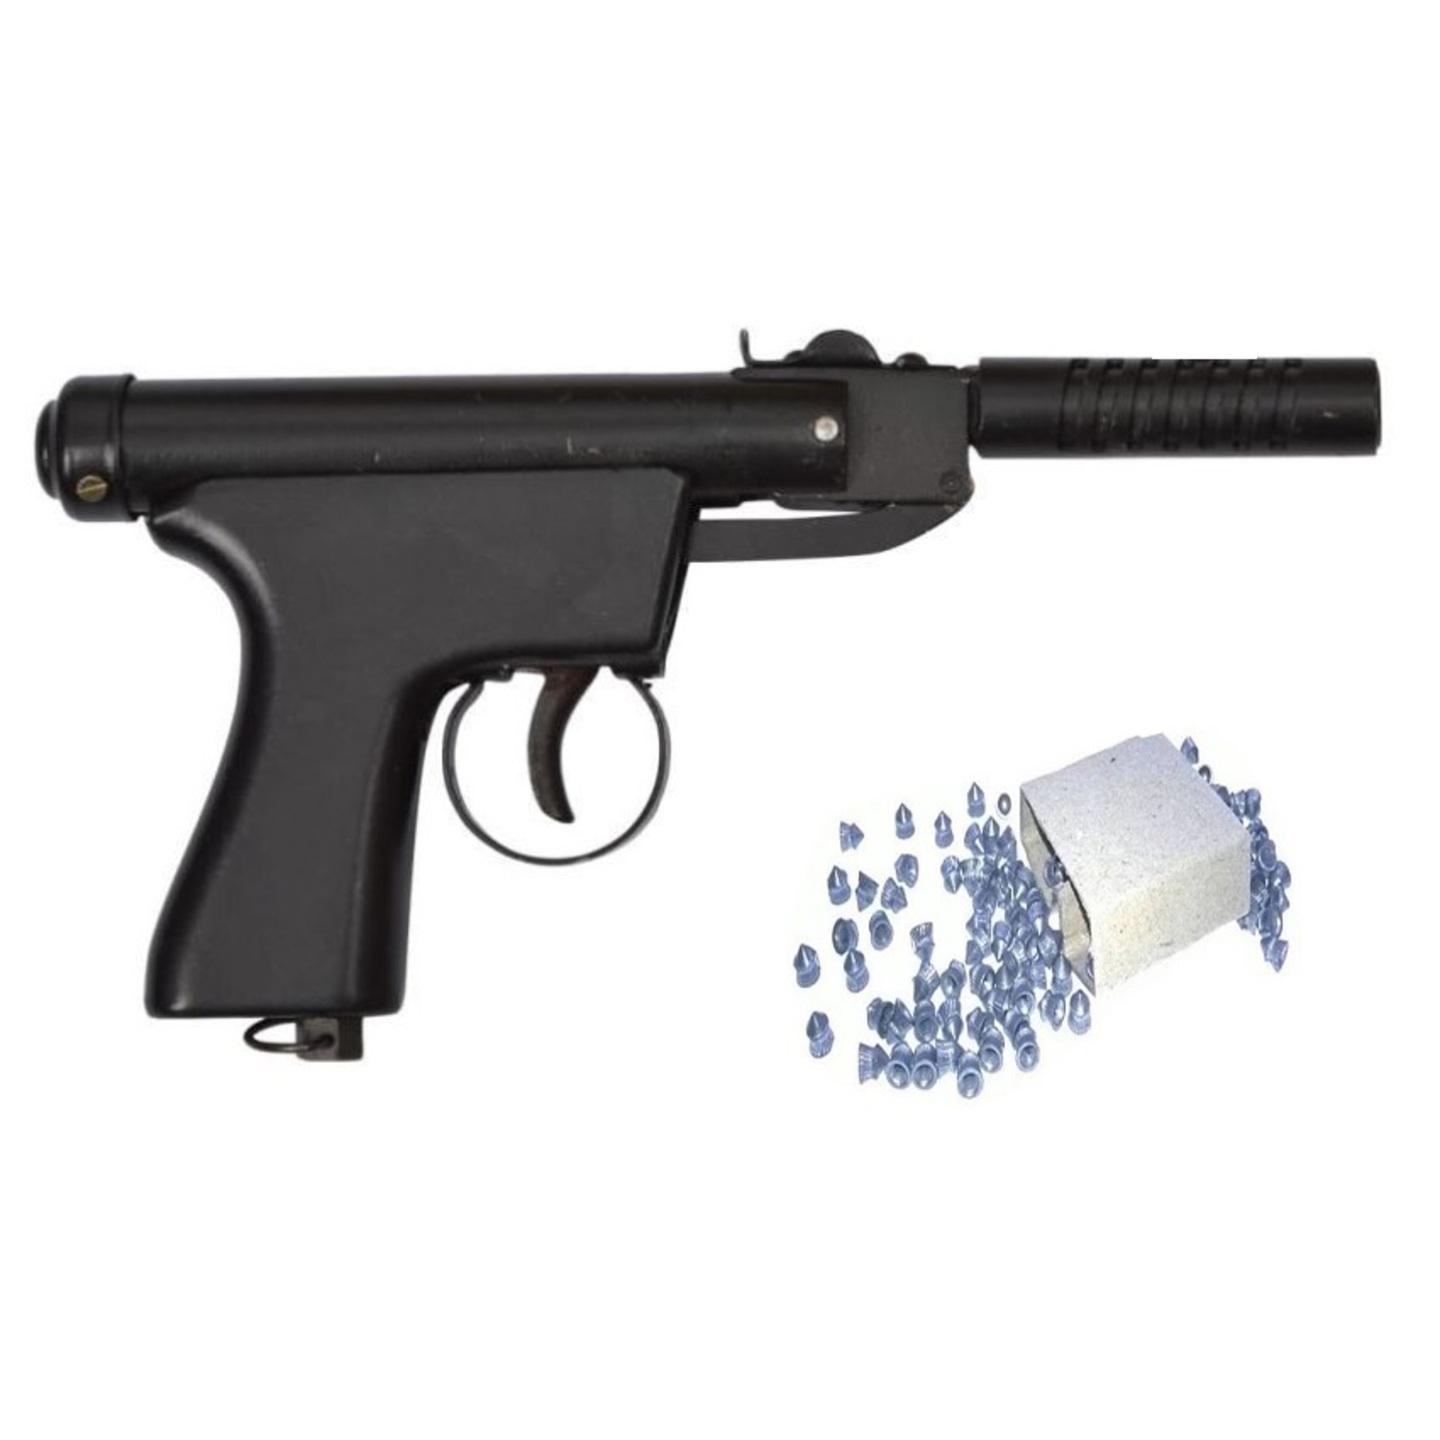 4.5 MM Air Pistol gun with 100 pellets No license required